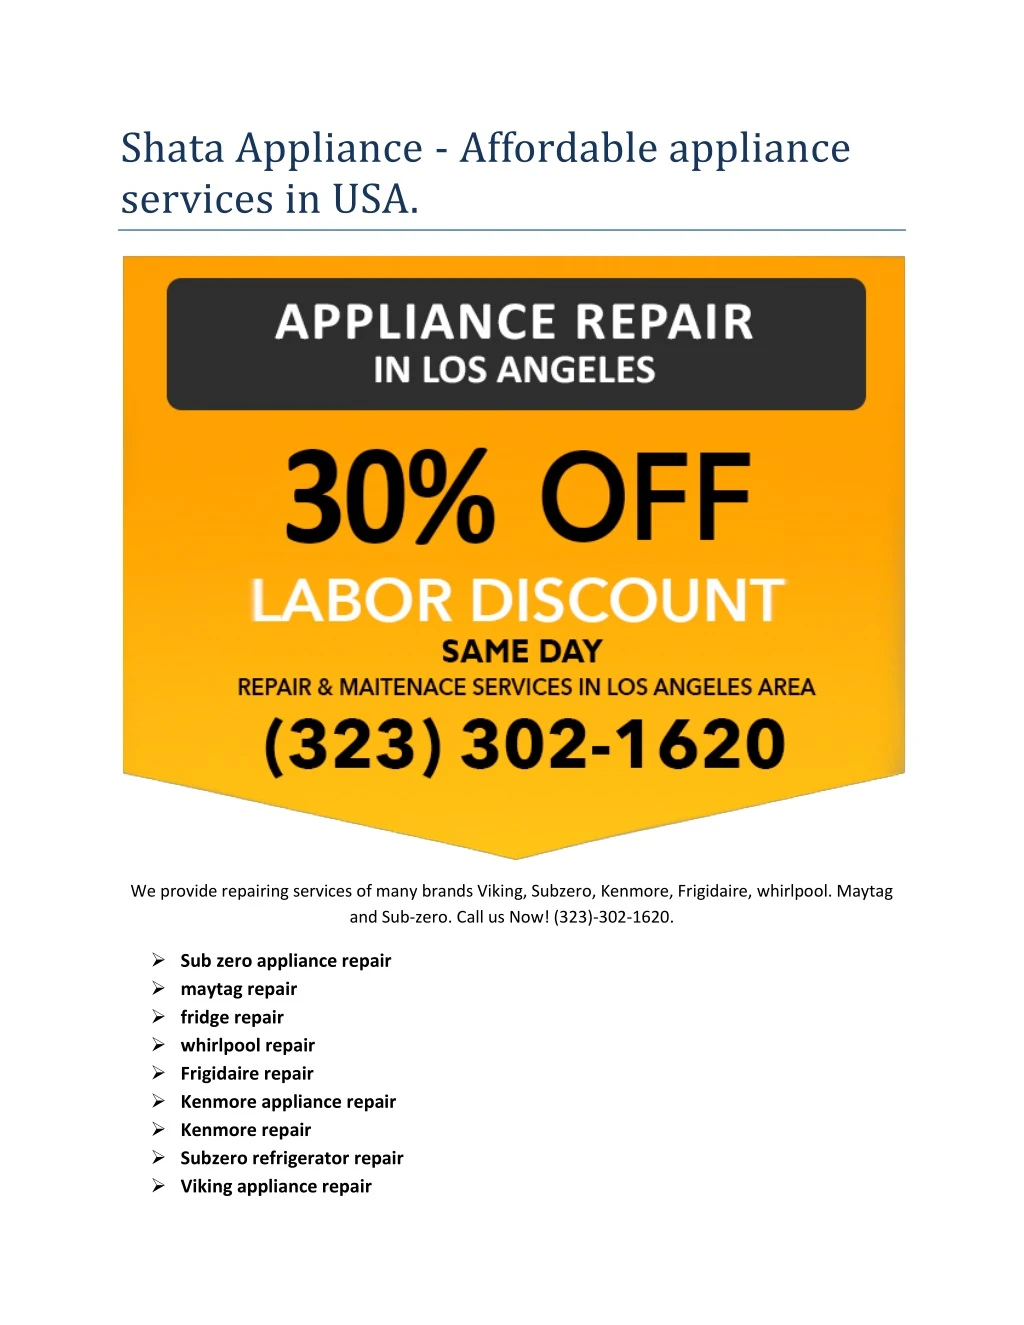 shata appliance affordable appliance services